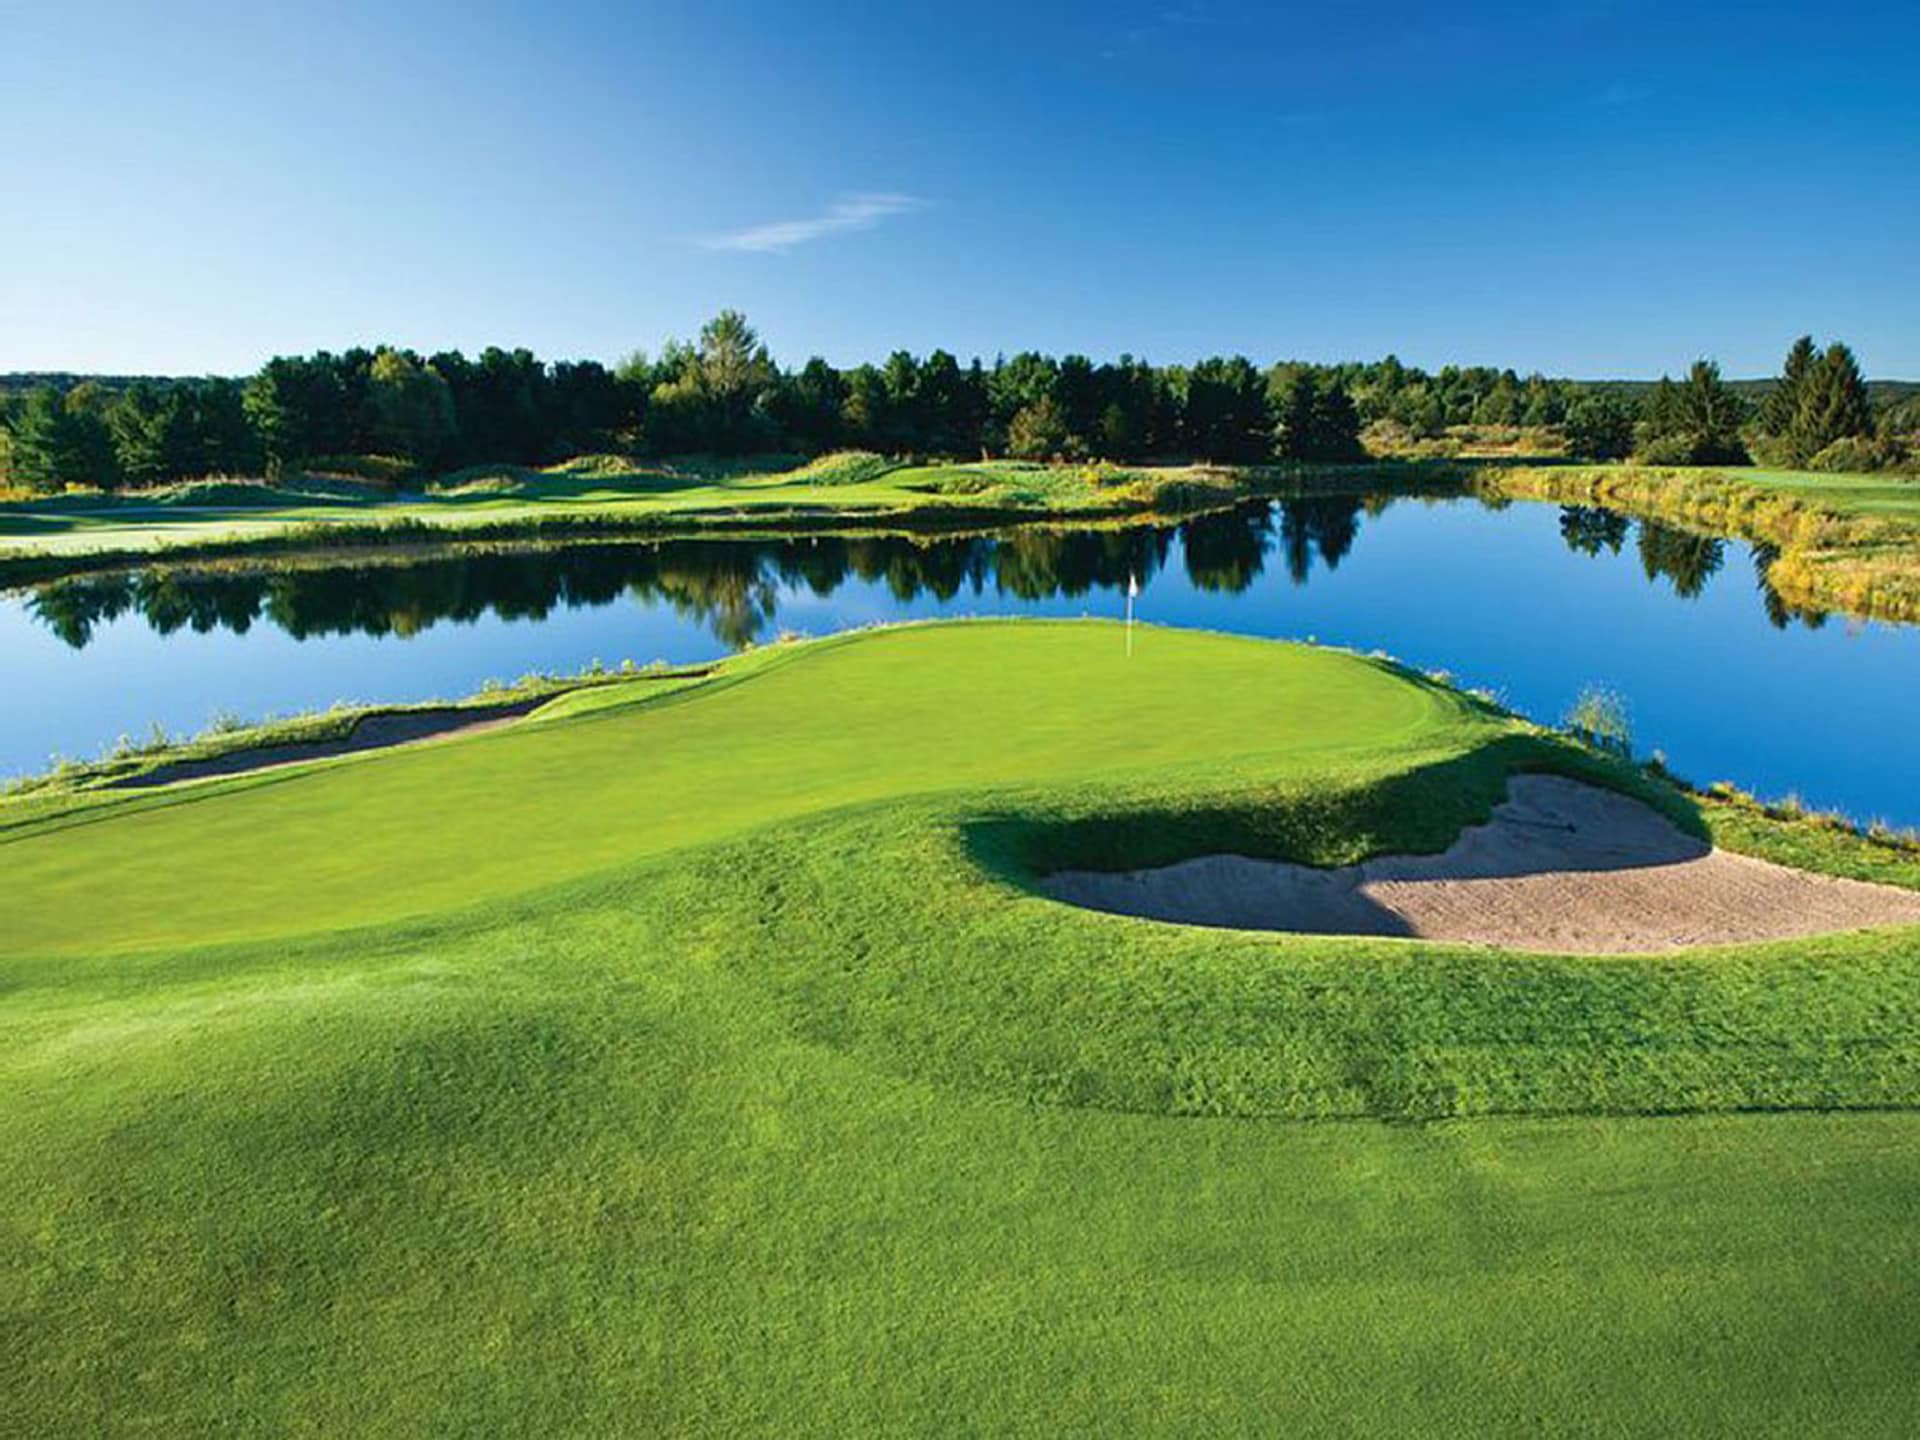 Just 5 miles from this championship golf course at the Grand Traverse Resort.